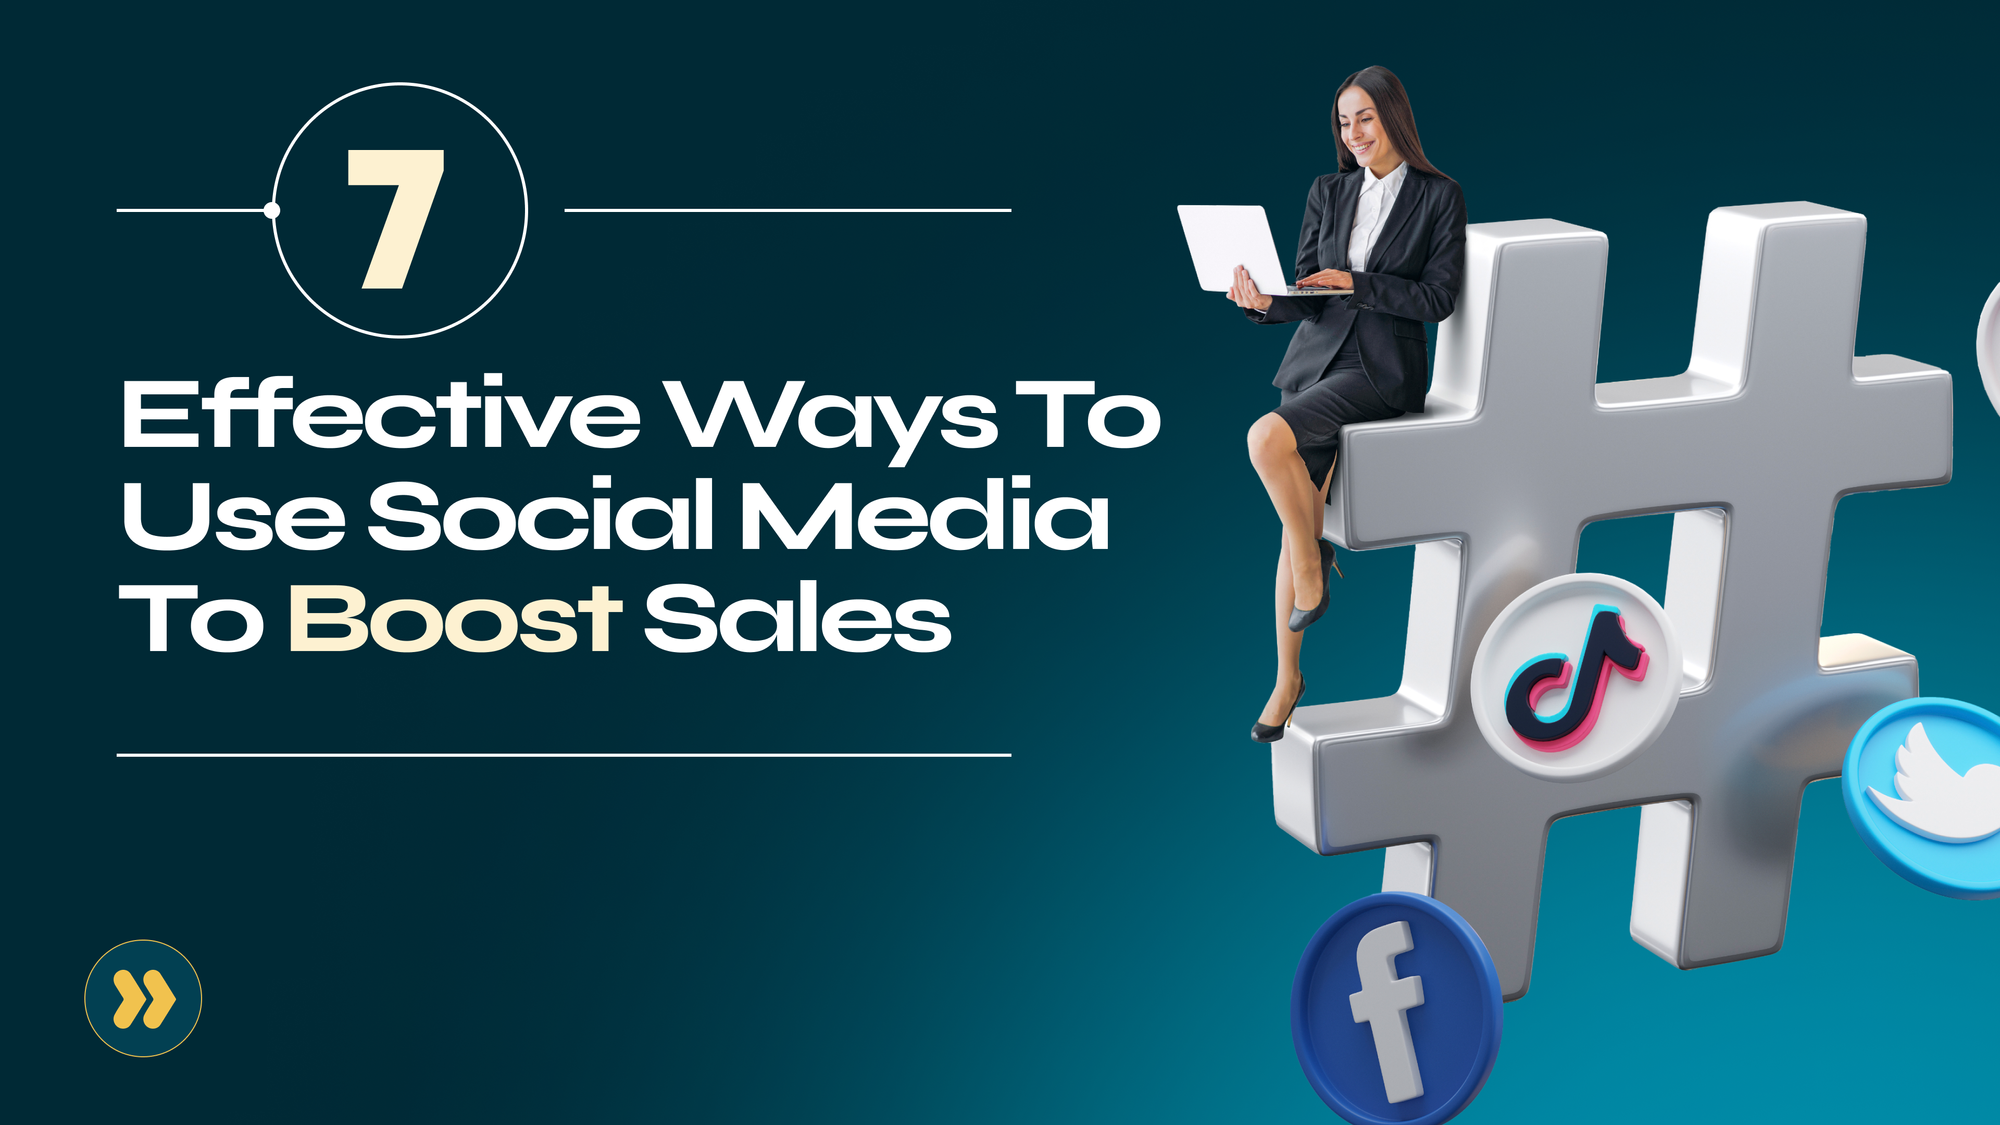 7 Effective Ways to Use Social Media to Boost Sales